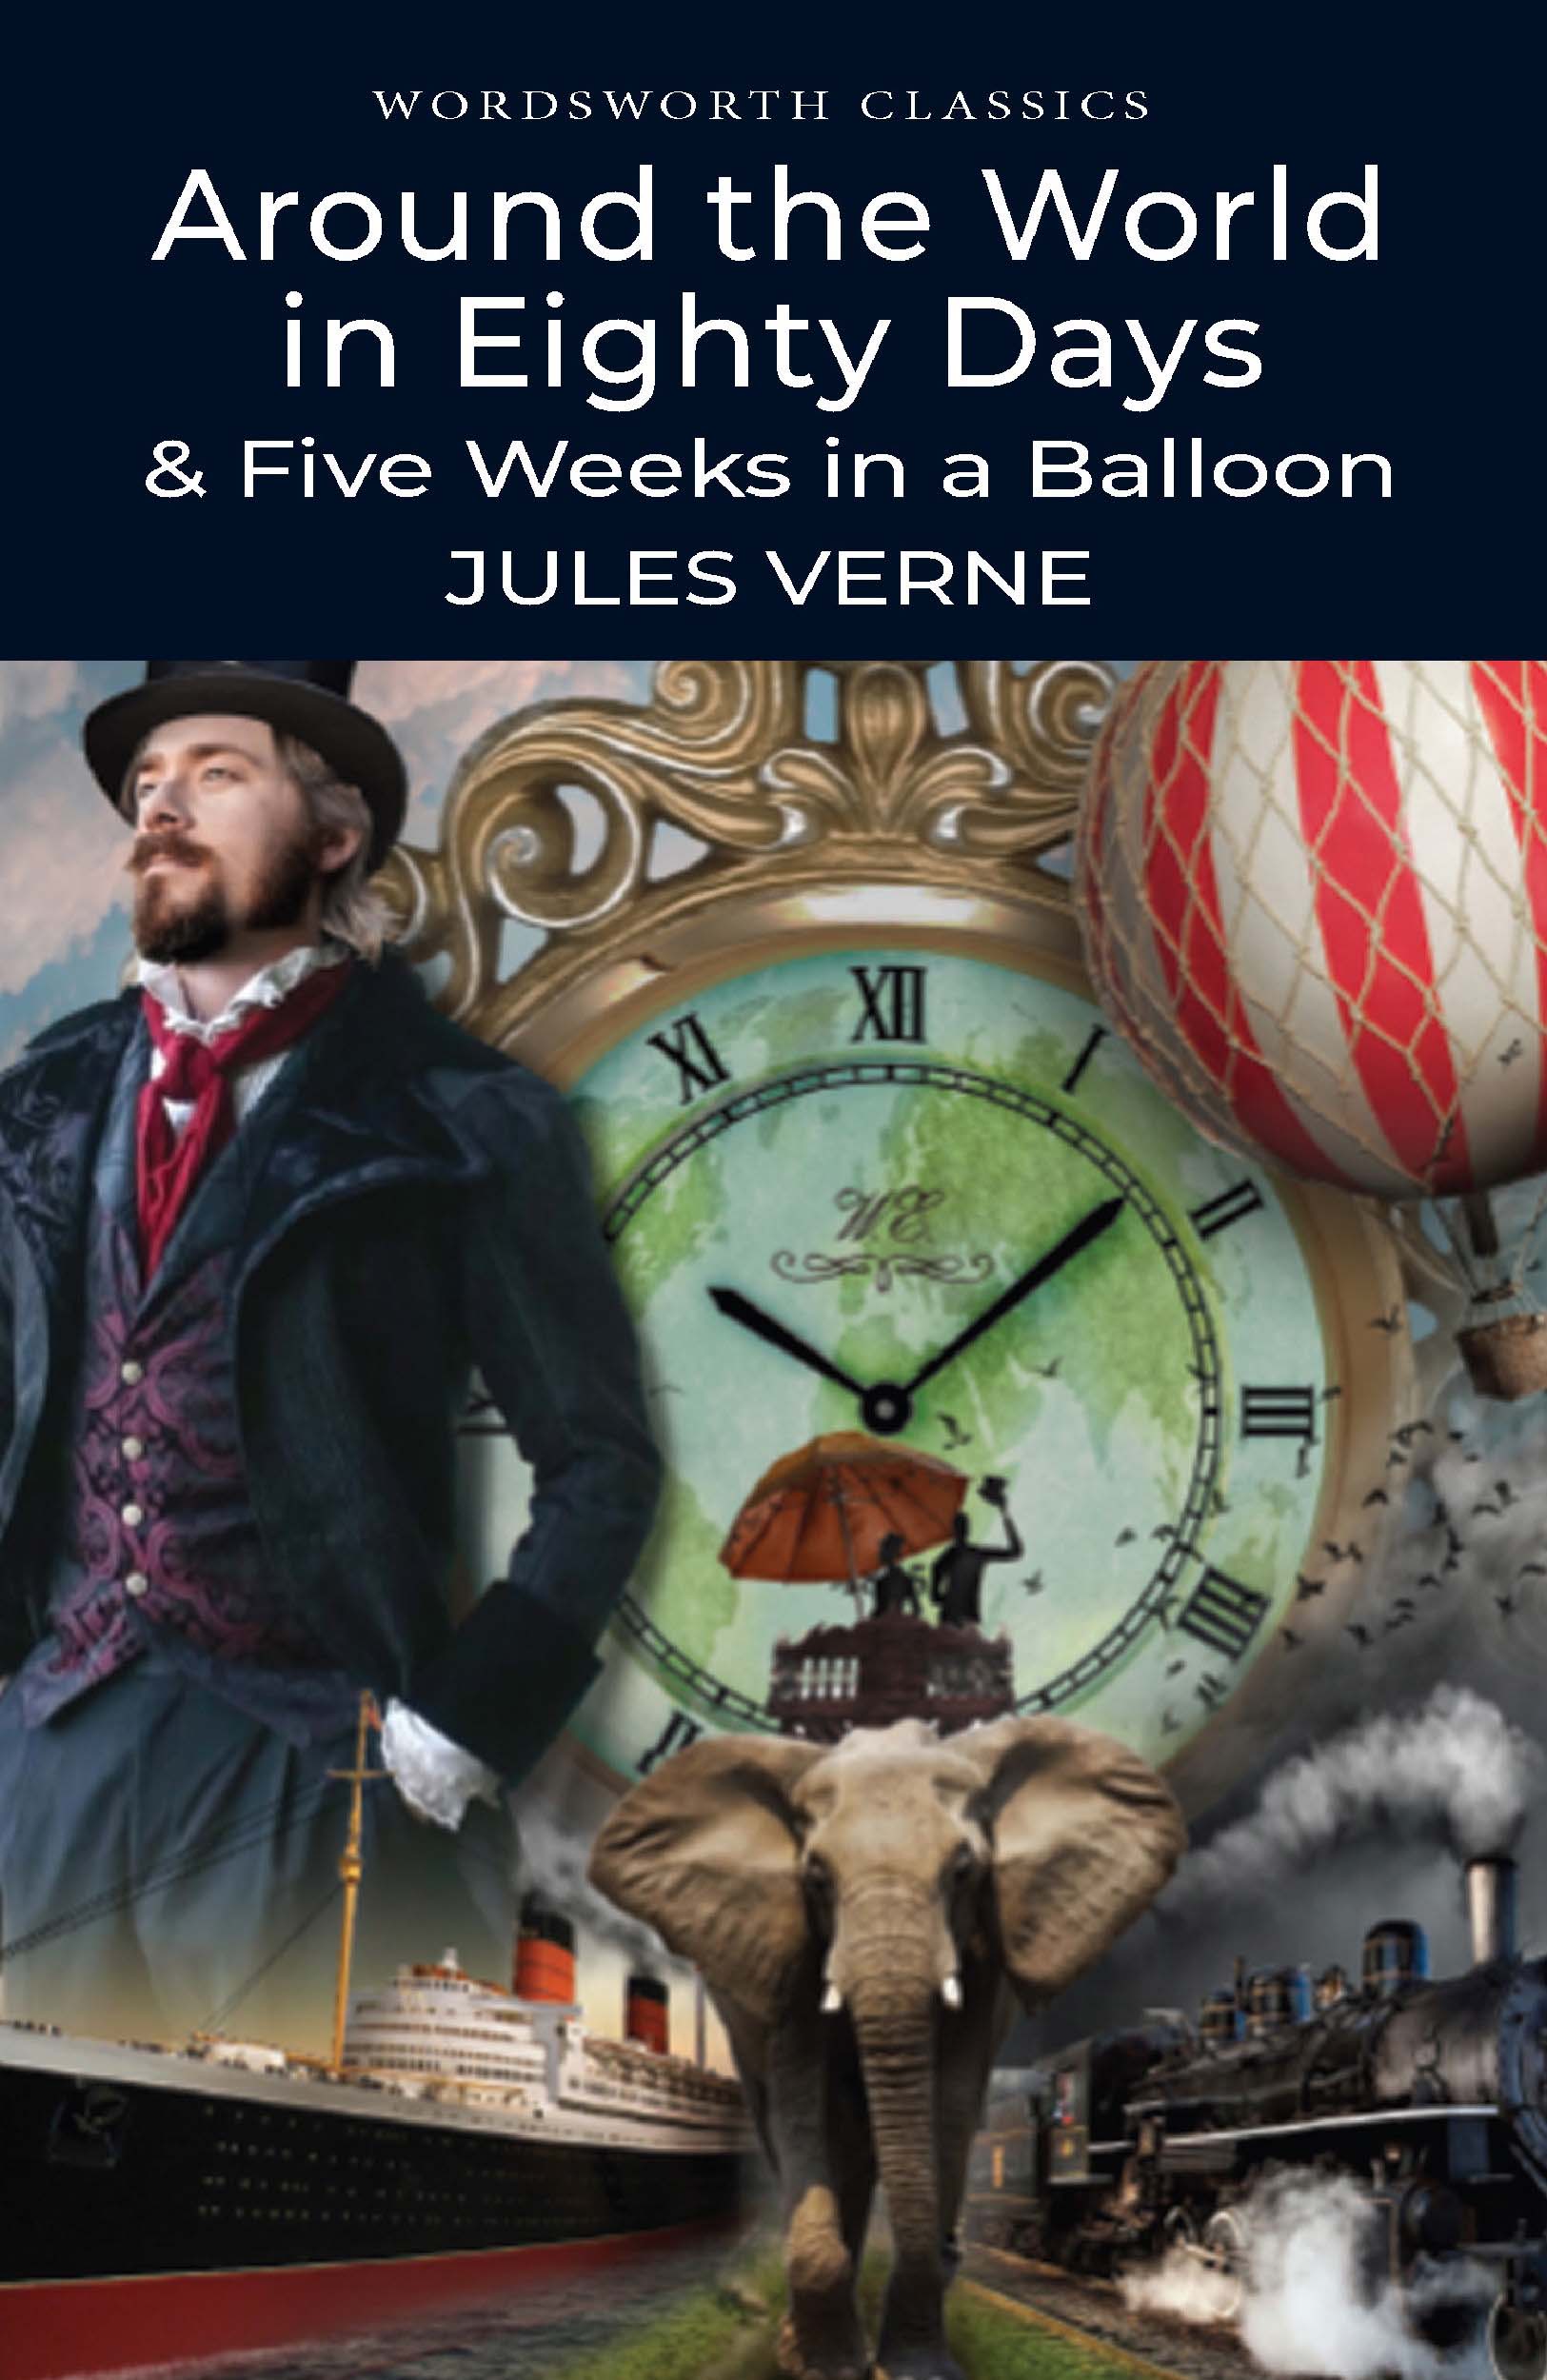 Around the World in Eighty Days & Five Weeks in a Balloon